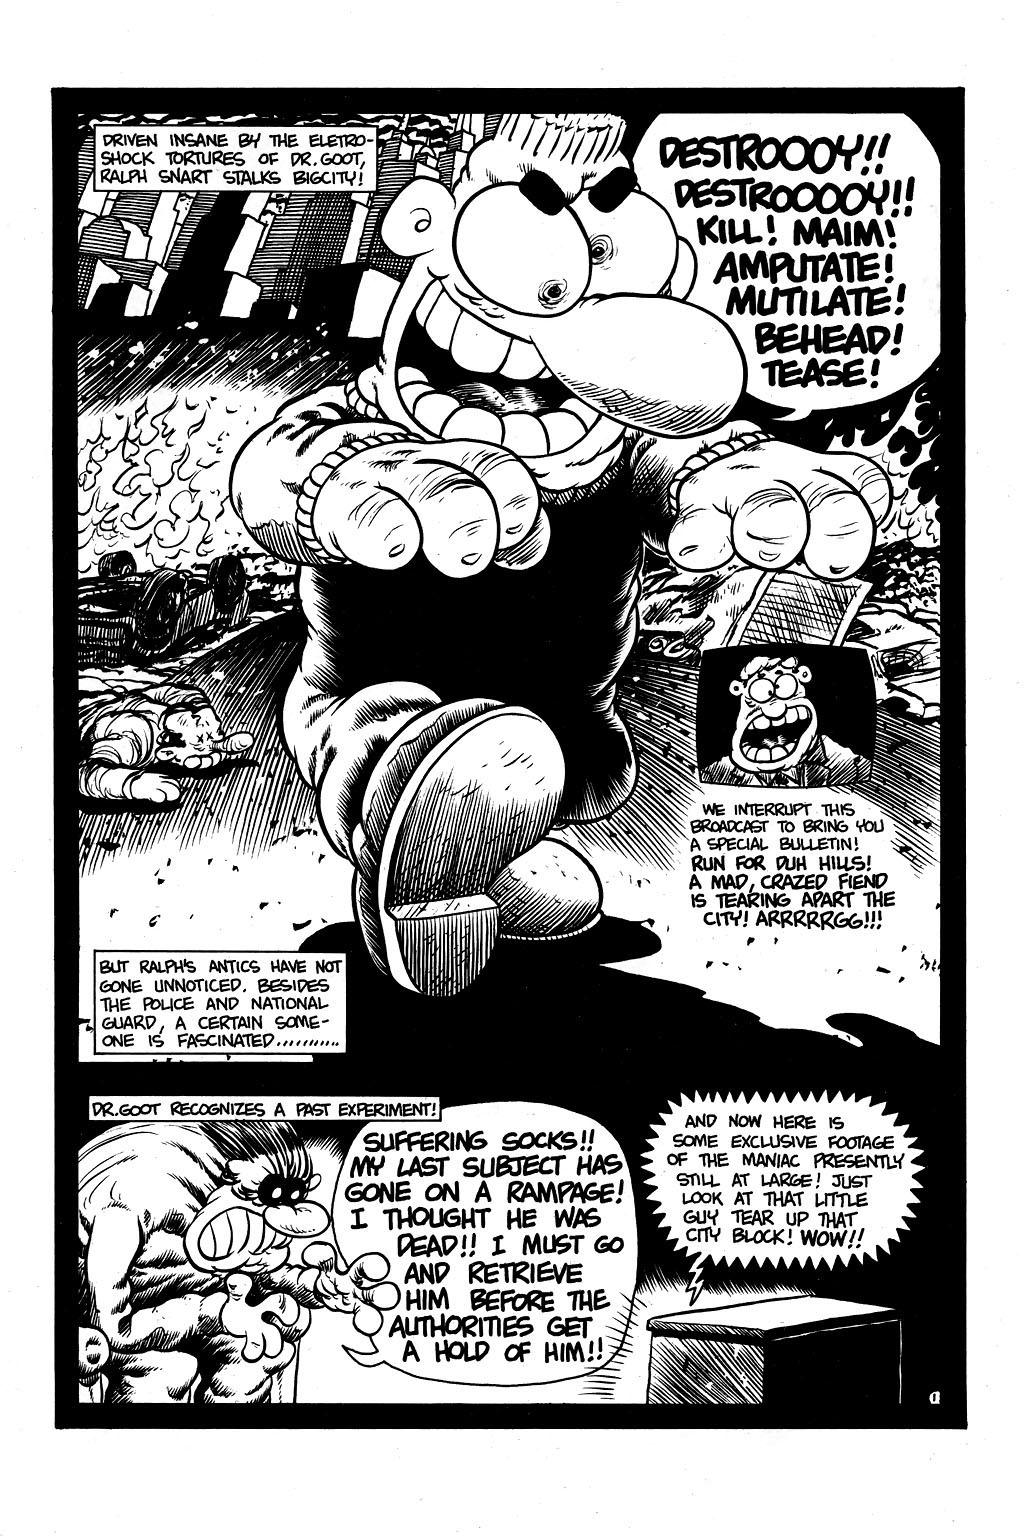 Ralph Snart Adventures (1986) issue 3 - Page 3